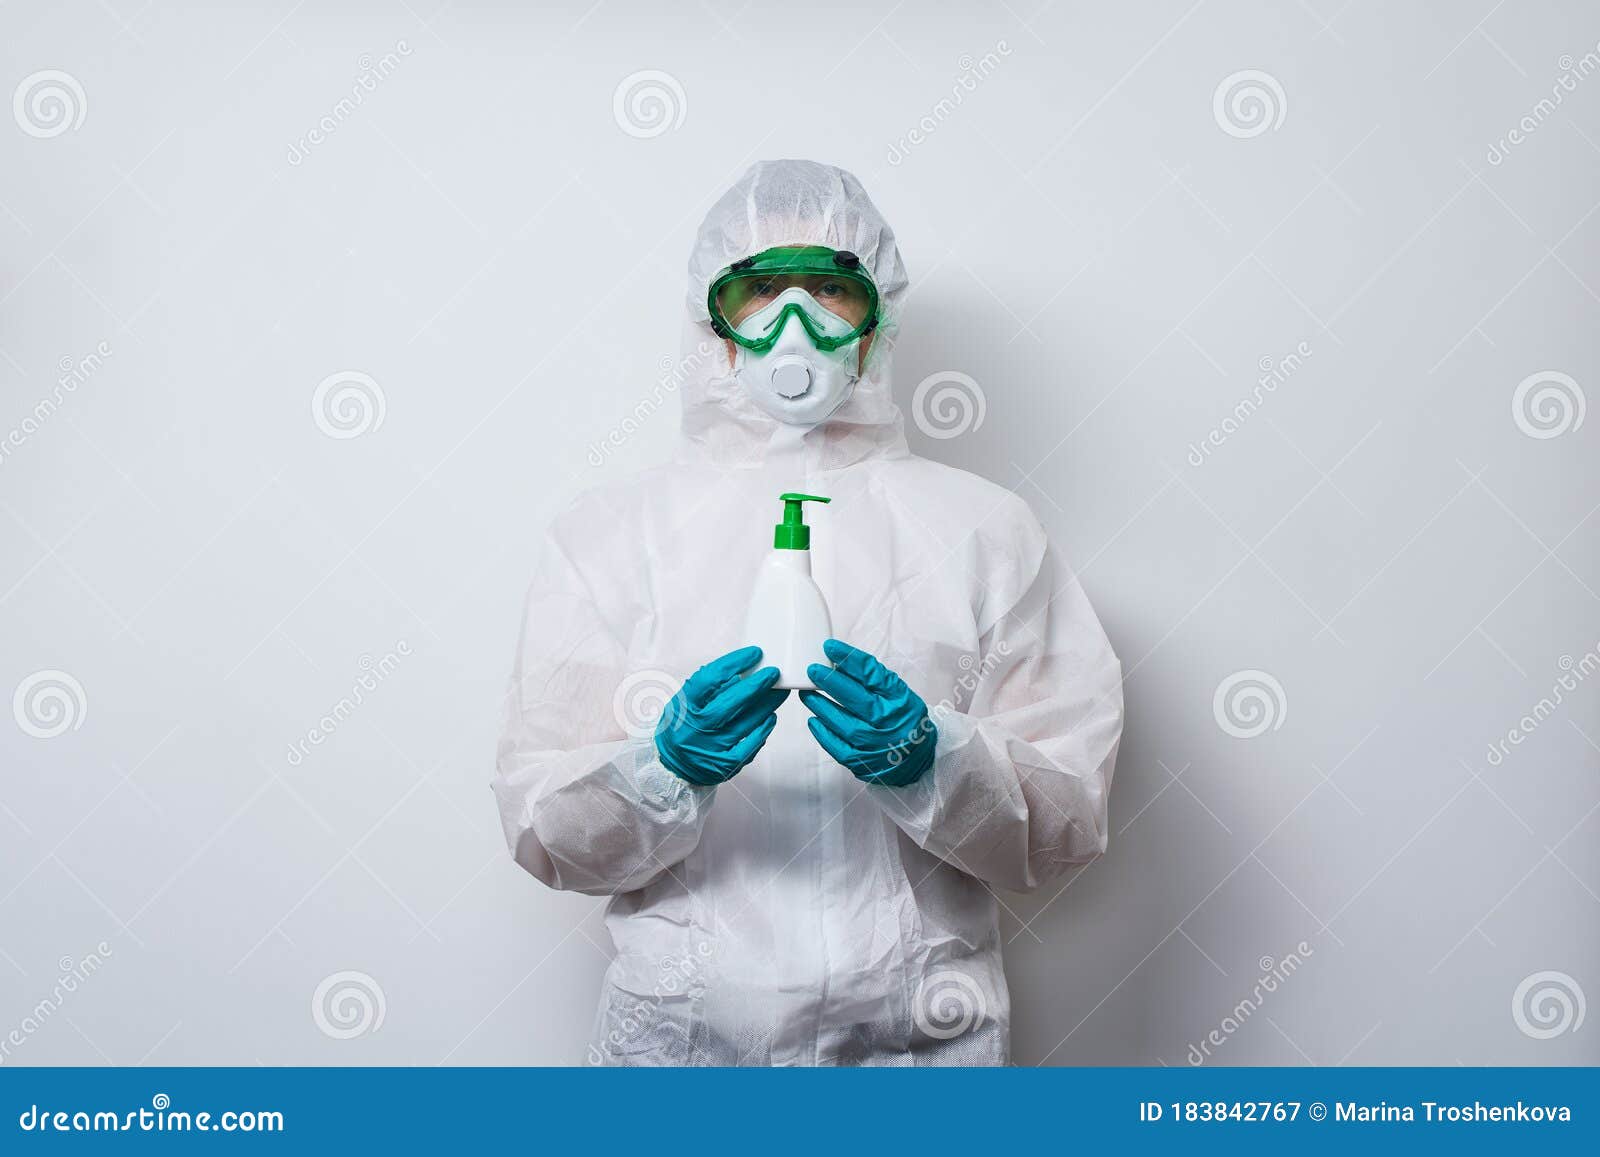 Doctor is Wearing PPE - Costume, Gloves and Surgical Face Mask in ...